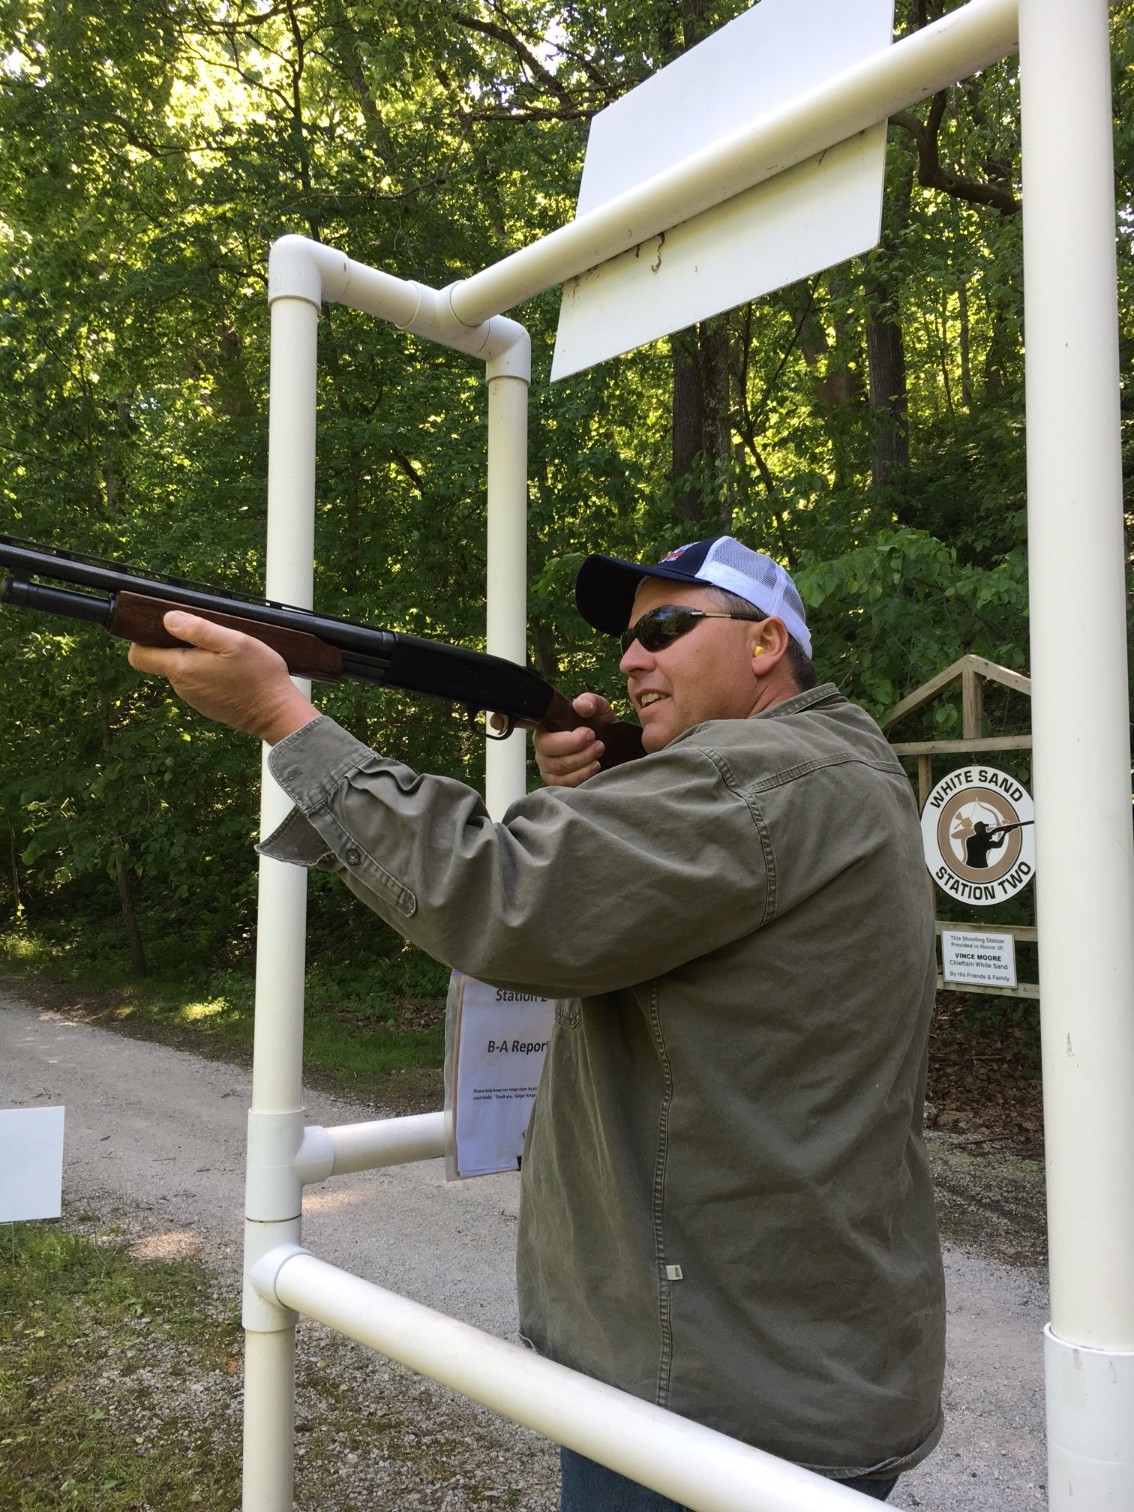 Hone Skills Shooting Skeet, Trap and Sporting Clays Conservation